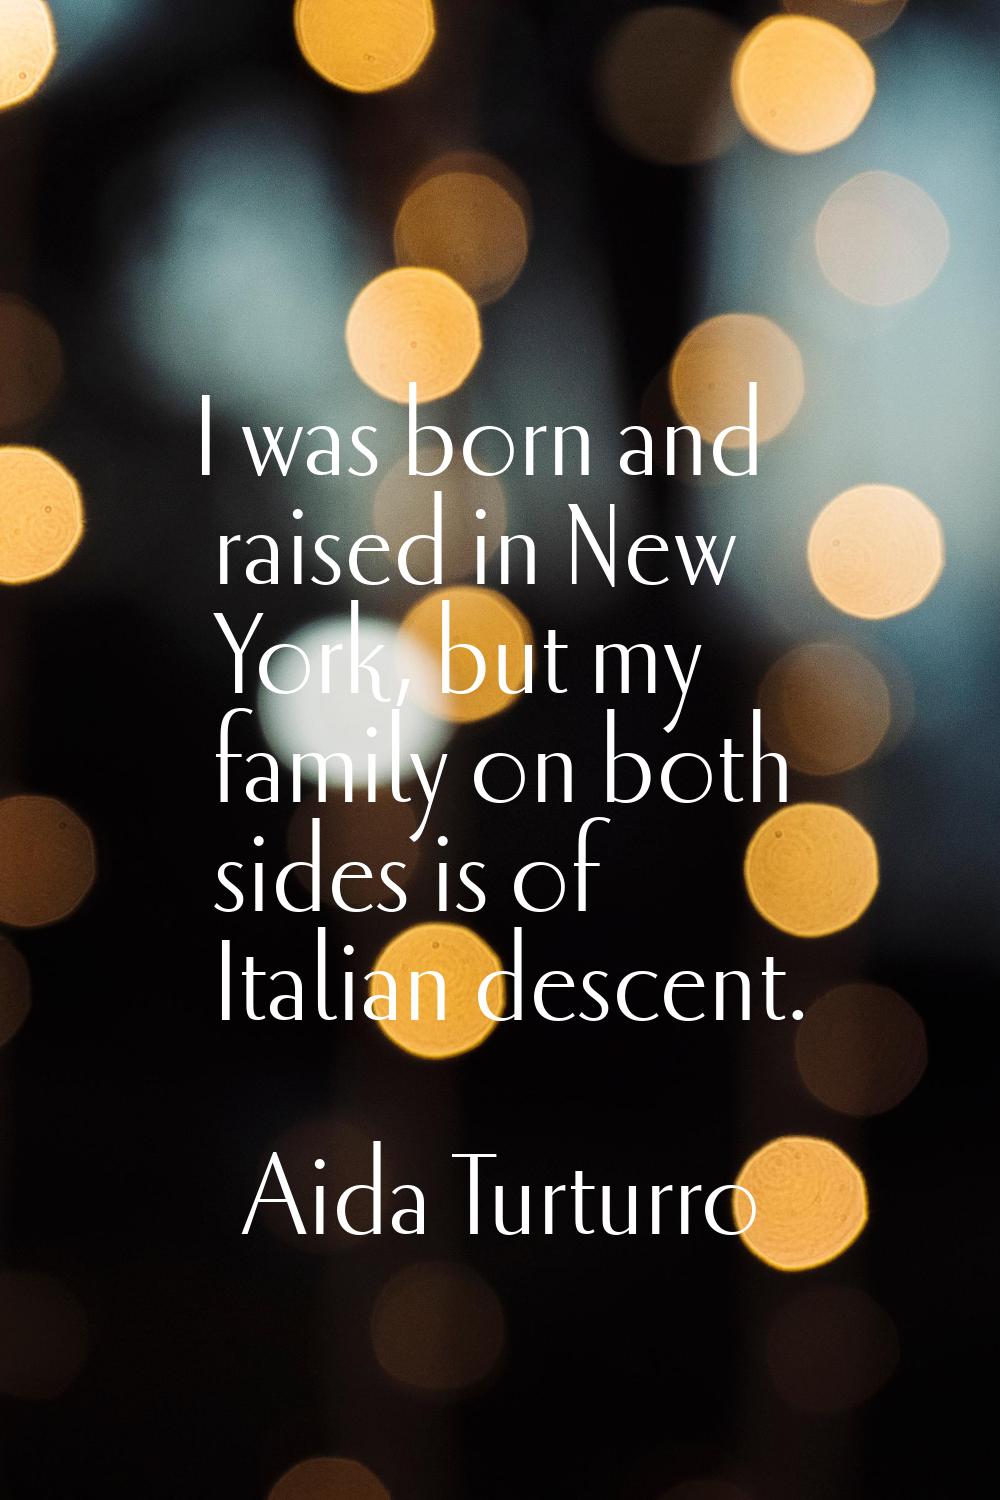 I was born and raised in New York, but my family on both sides is of Italian descent.